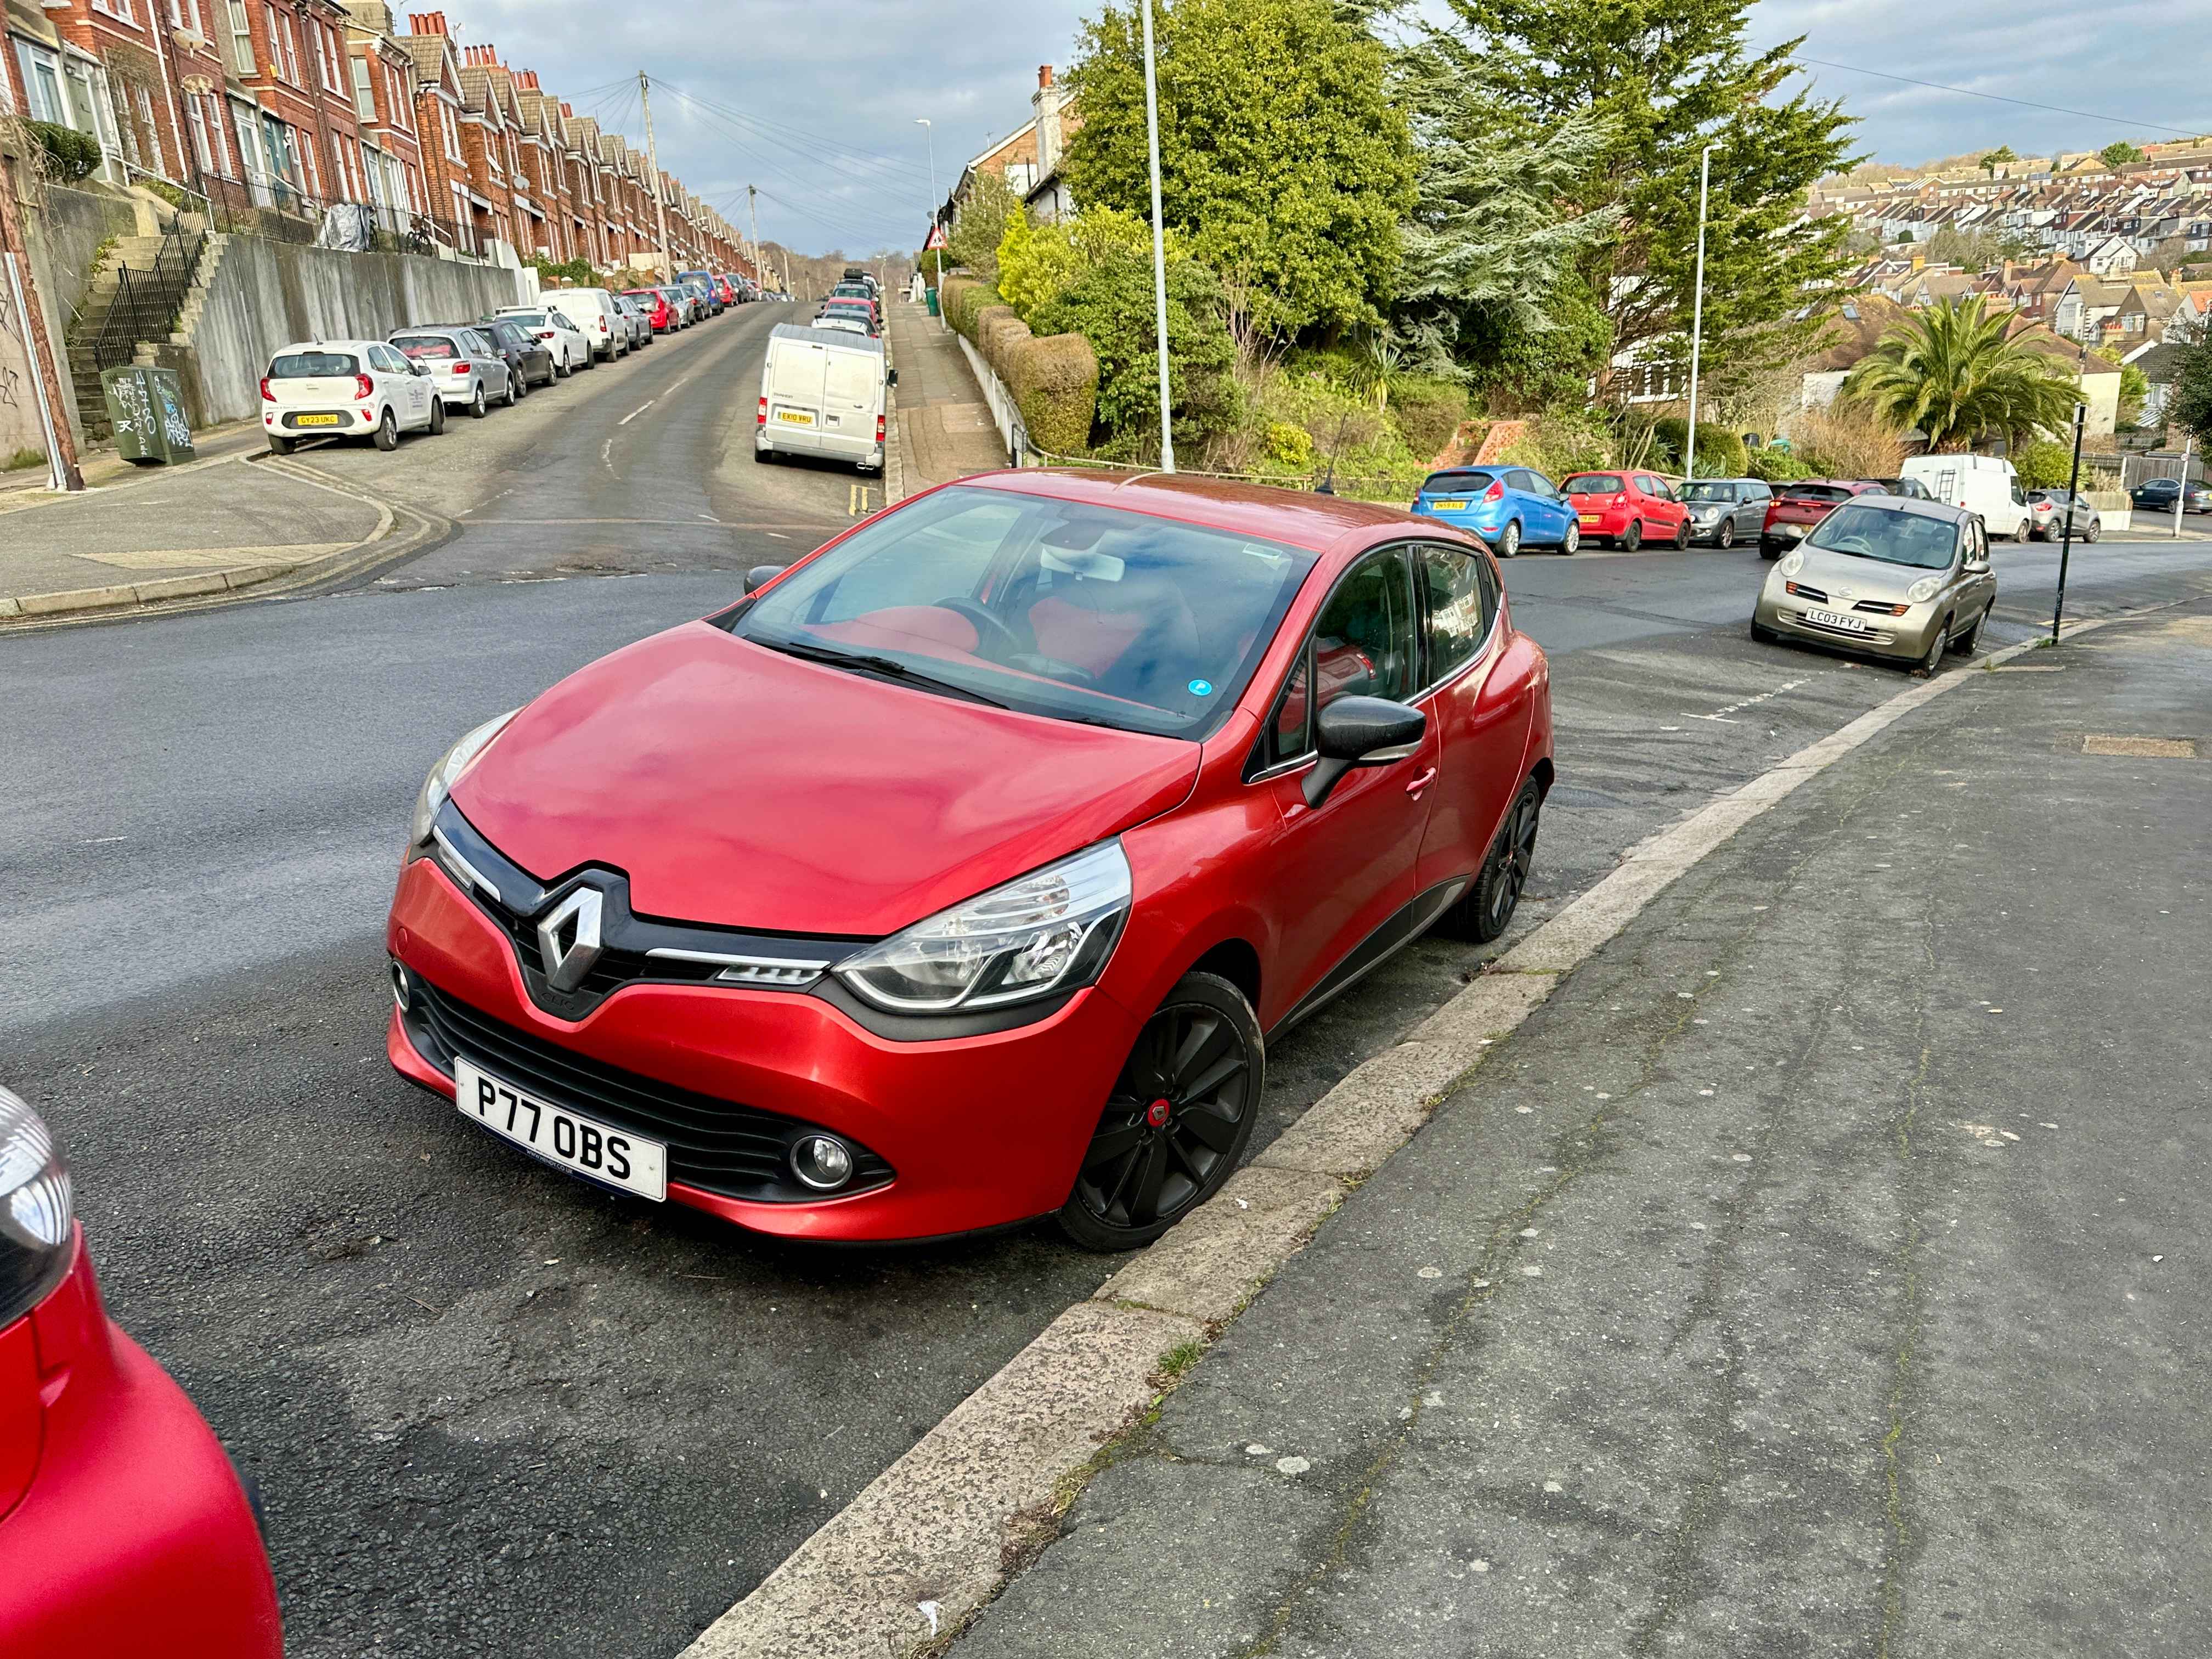 Photograph of P77 OBS - a Red Renault Clio parked in Hollingdean by a non-resident. The fourth of four photographs supplied by the residents of Hollingdean.